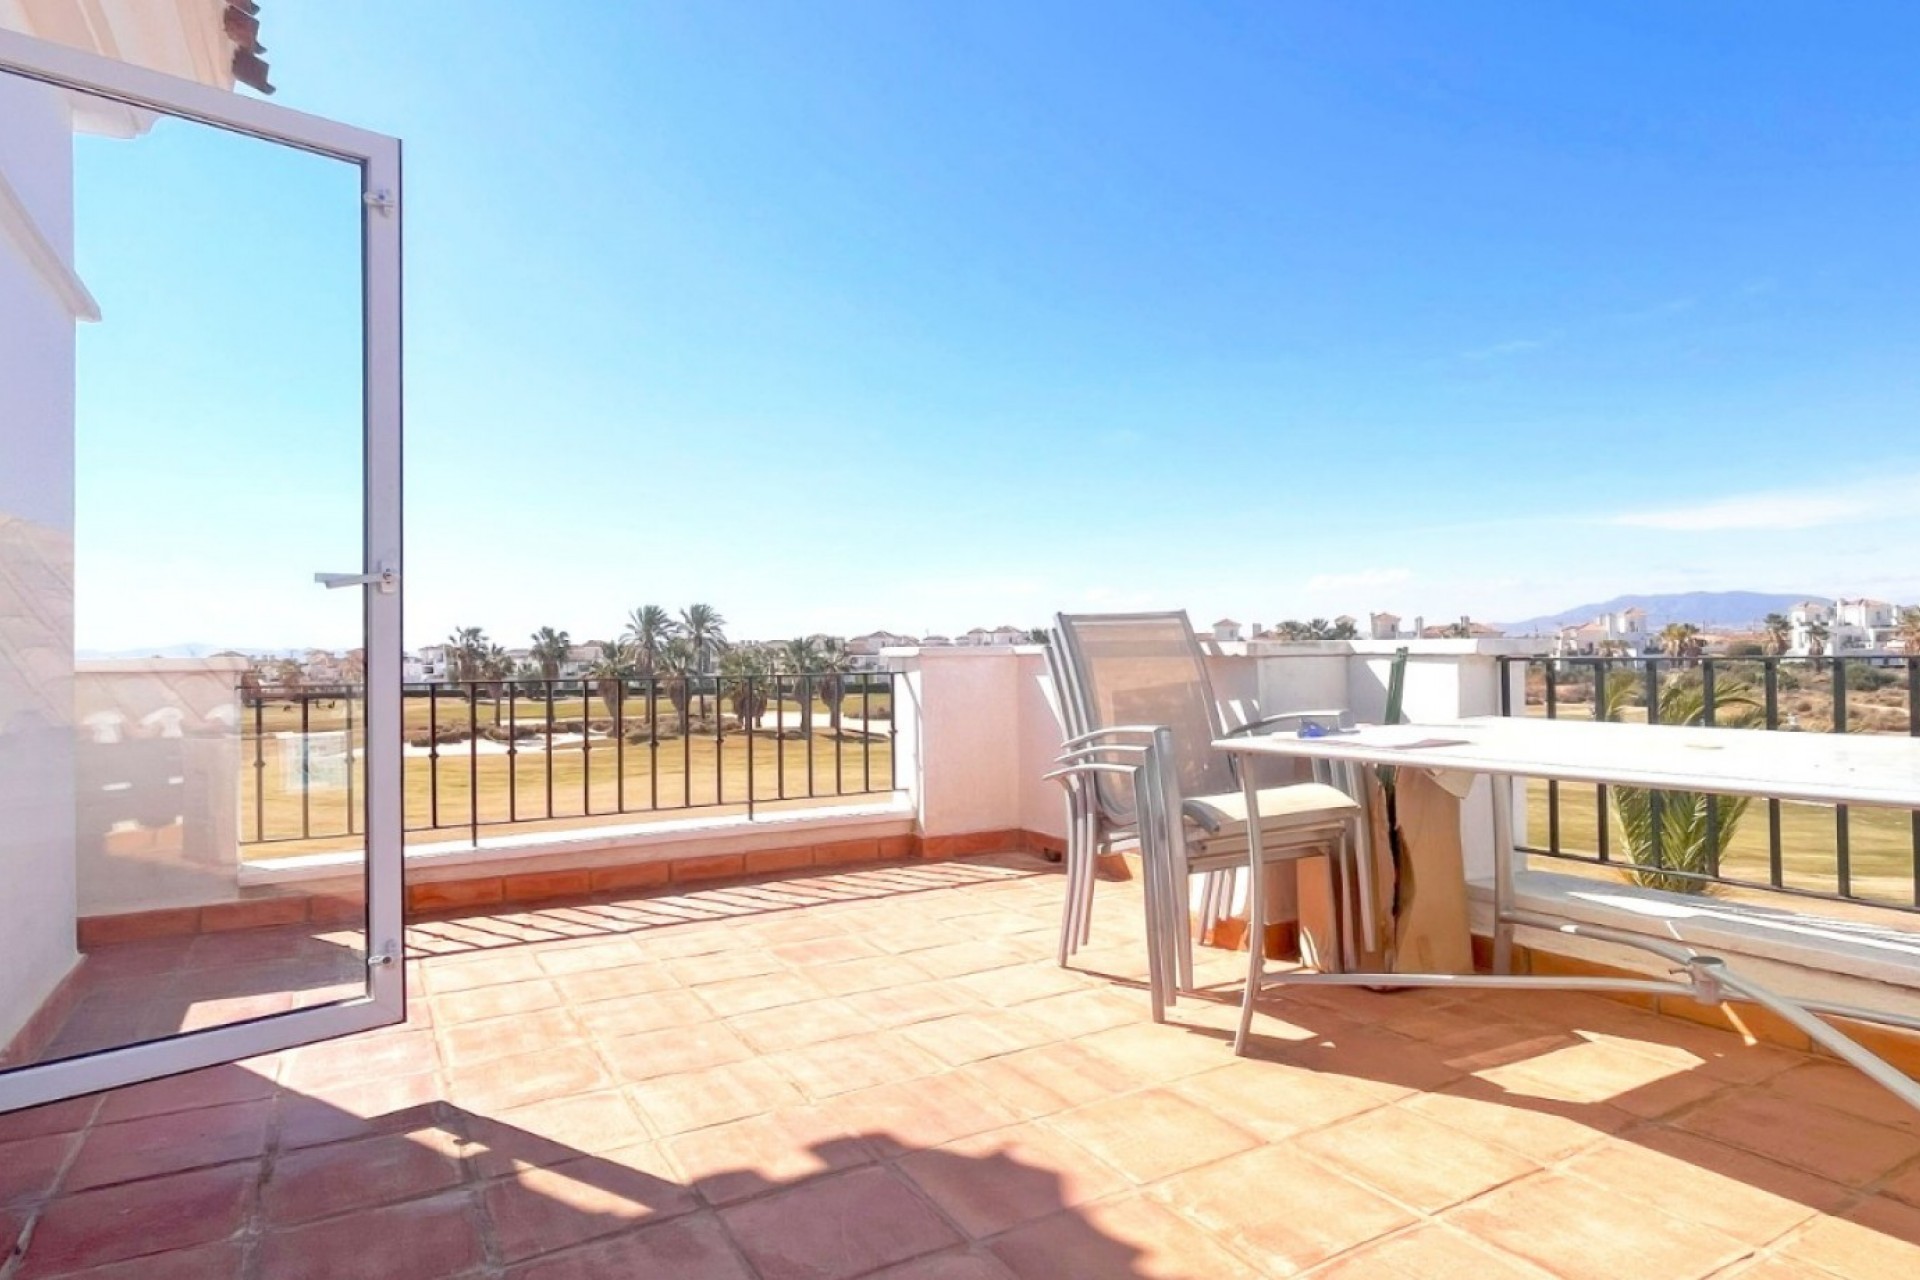 Revente - Town house -
Torre Pacheco - Inland